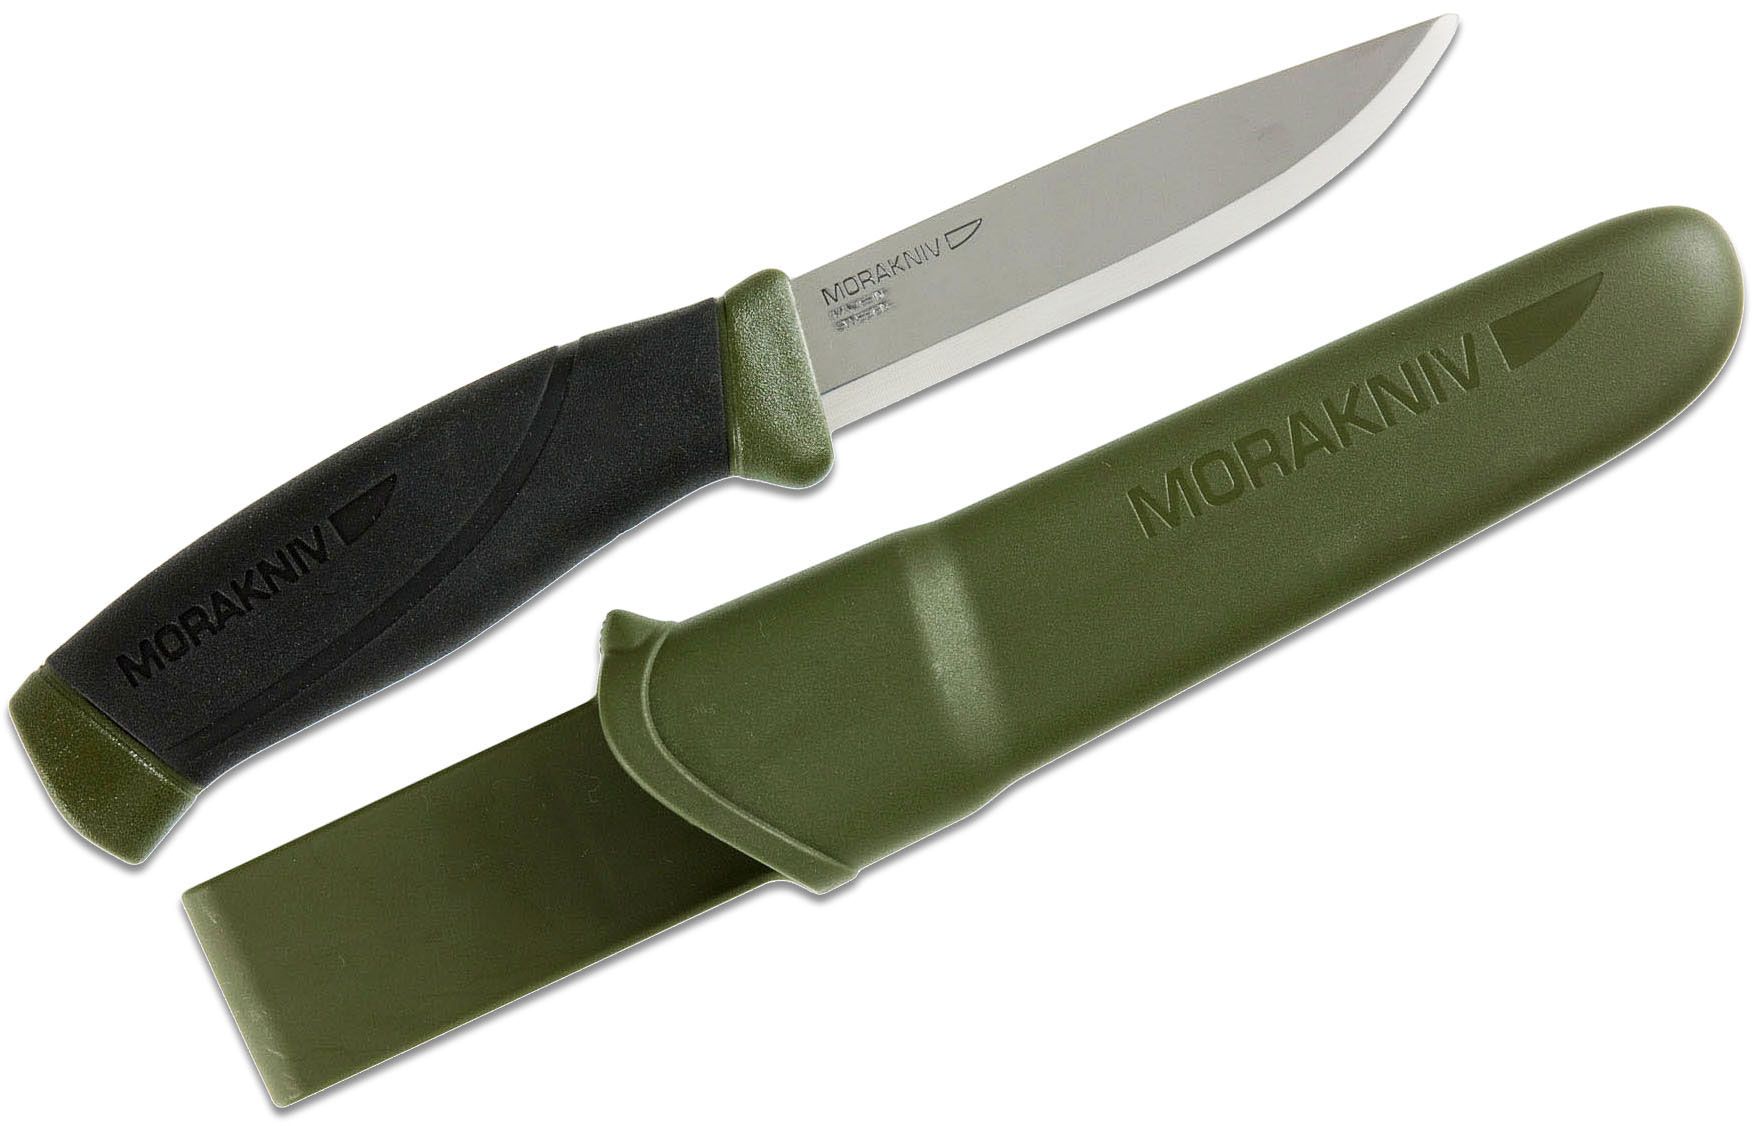  Morakniv Companion Fixed Blade Outdoor Knife with Sandvik  Stainless Steel Blade, 4.1-Inch, Military Green : Hunting Fixed Blade Knives  : Sports & Outdoors